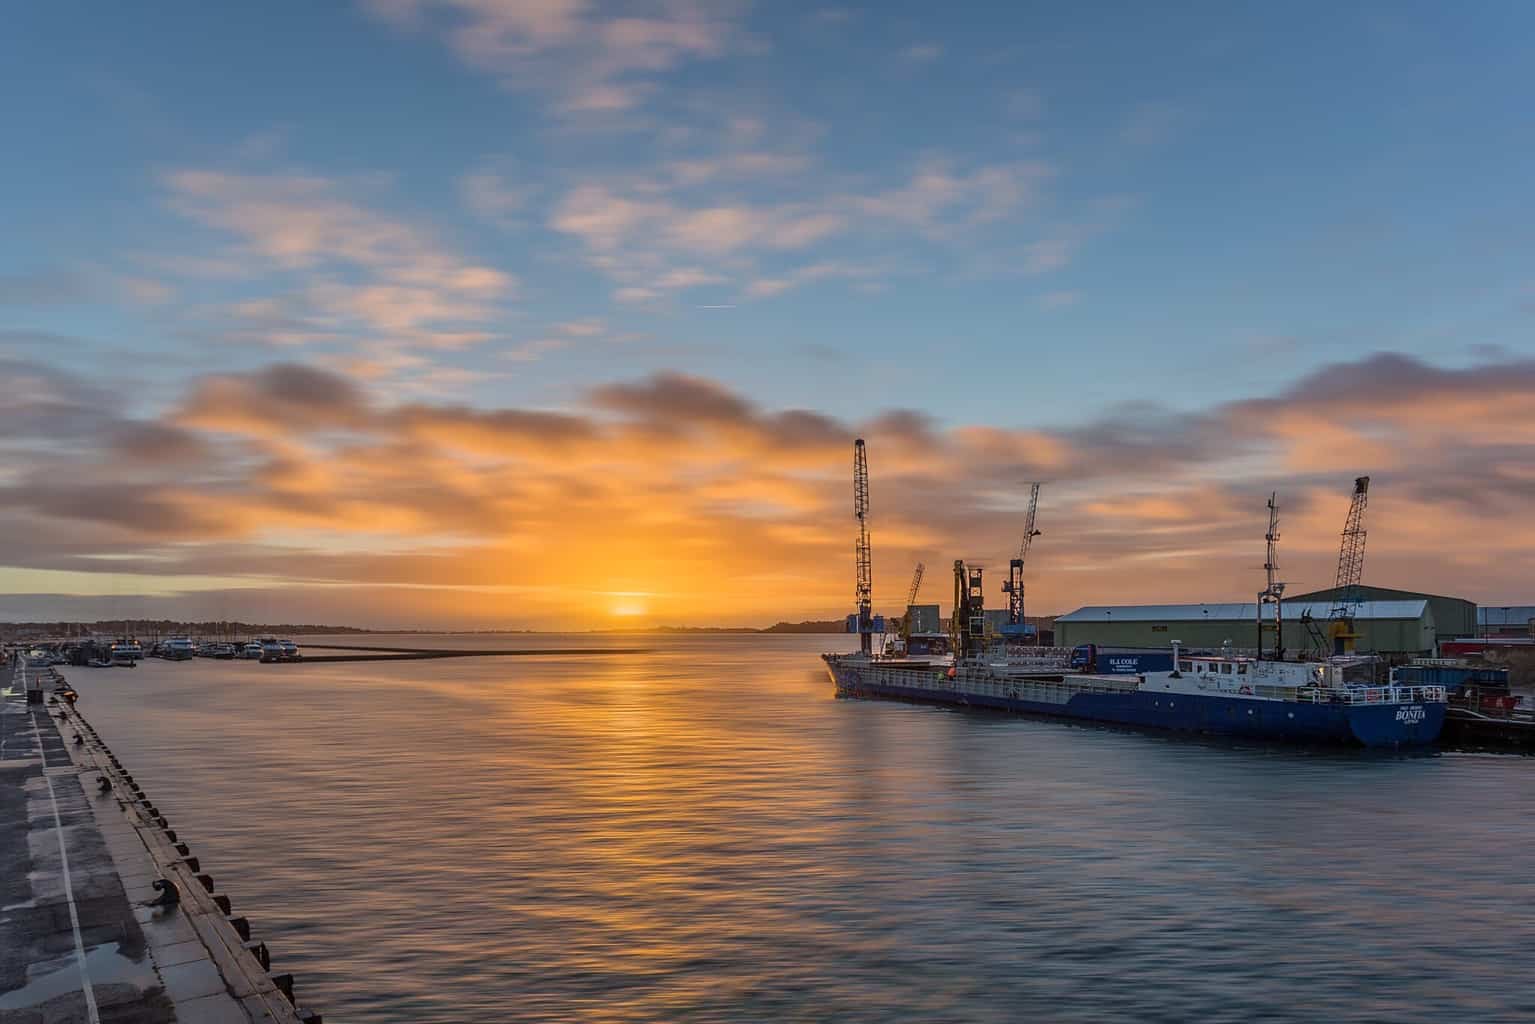  Sunrise shot taken from Poole Quay looknig towards Sandbanks and the Port of Poole 